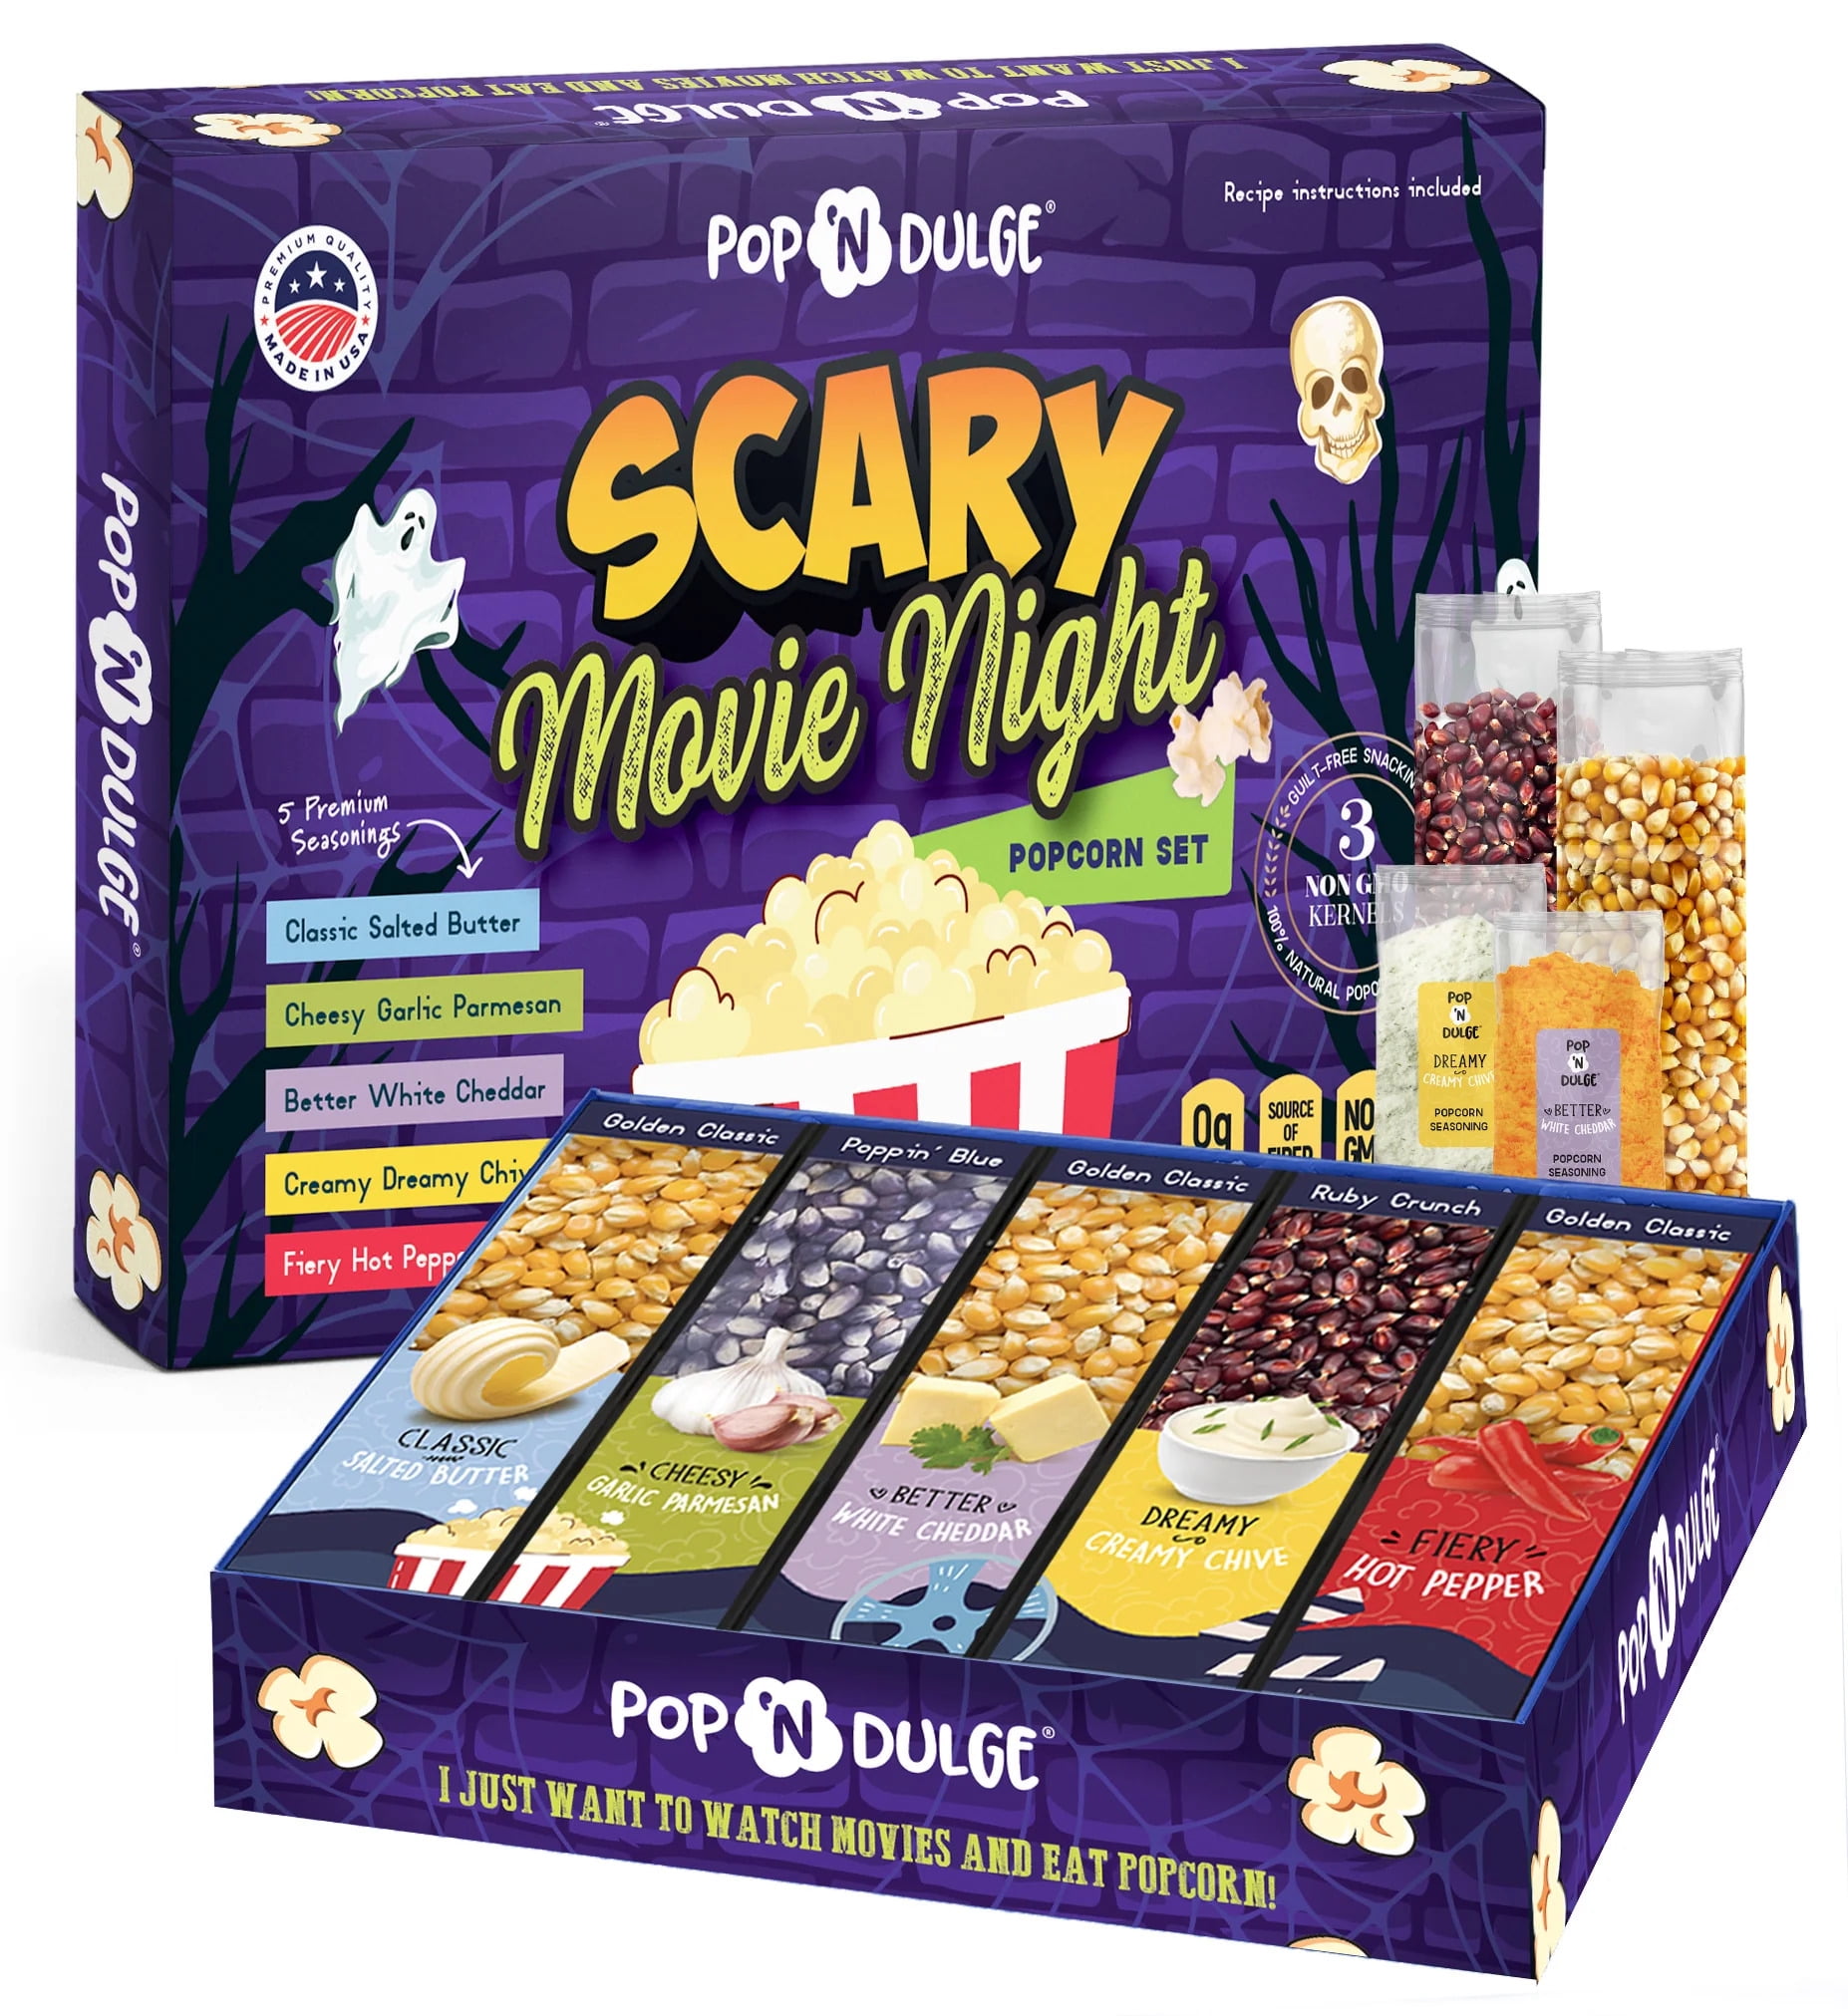 Five nights at freddy's party favors/ popcorn candy box/ goodie bag SET OF  10